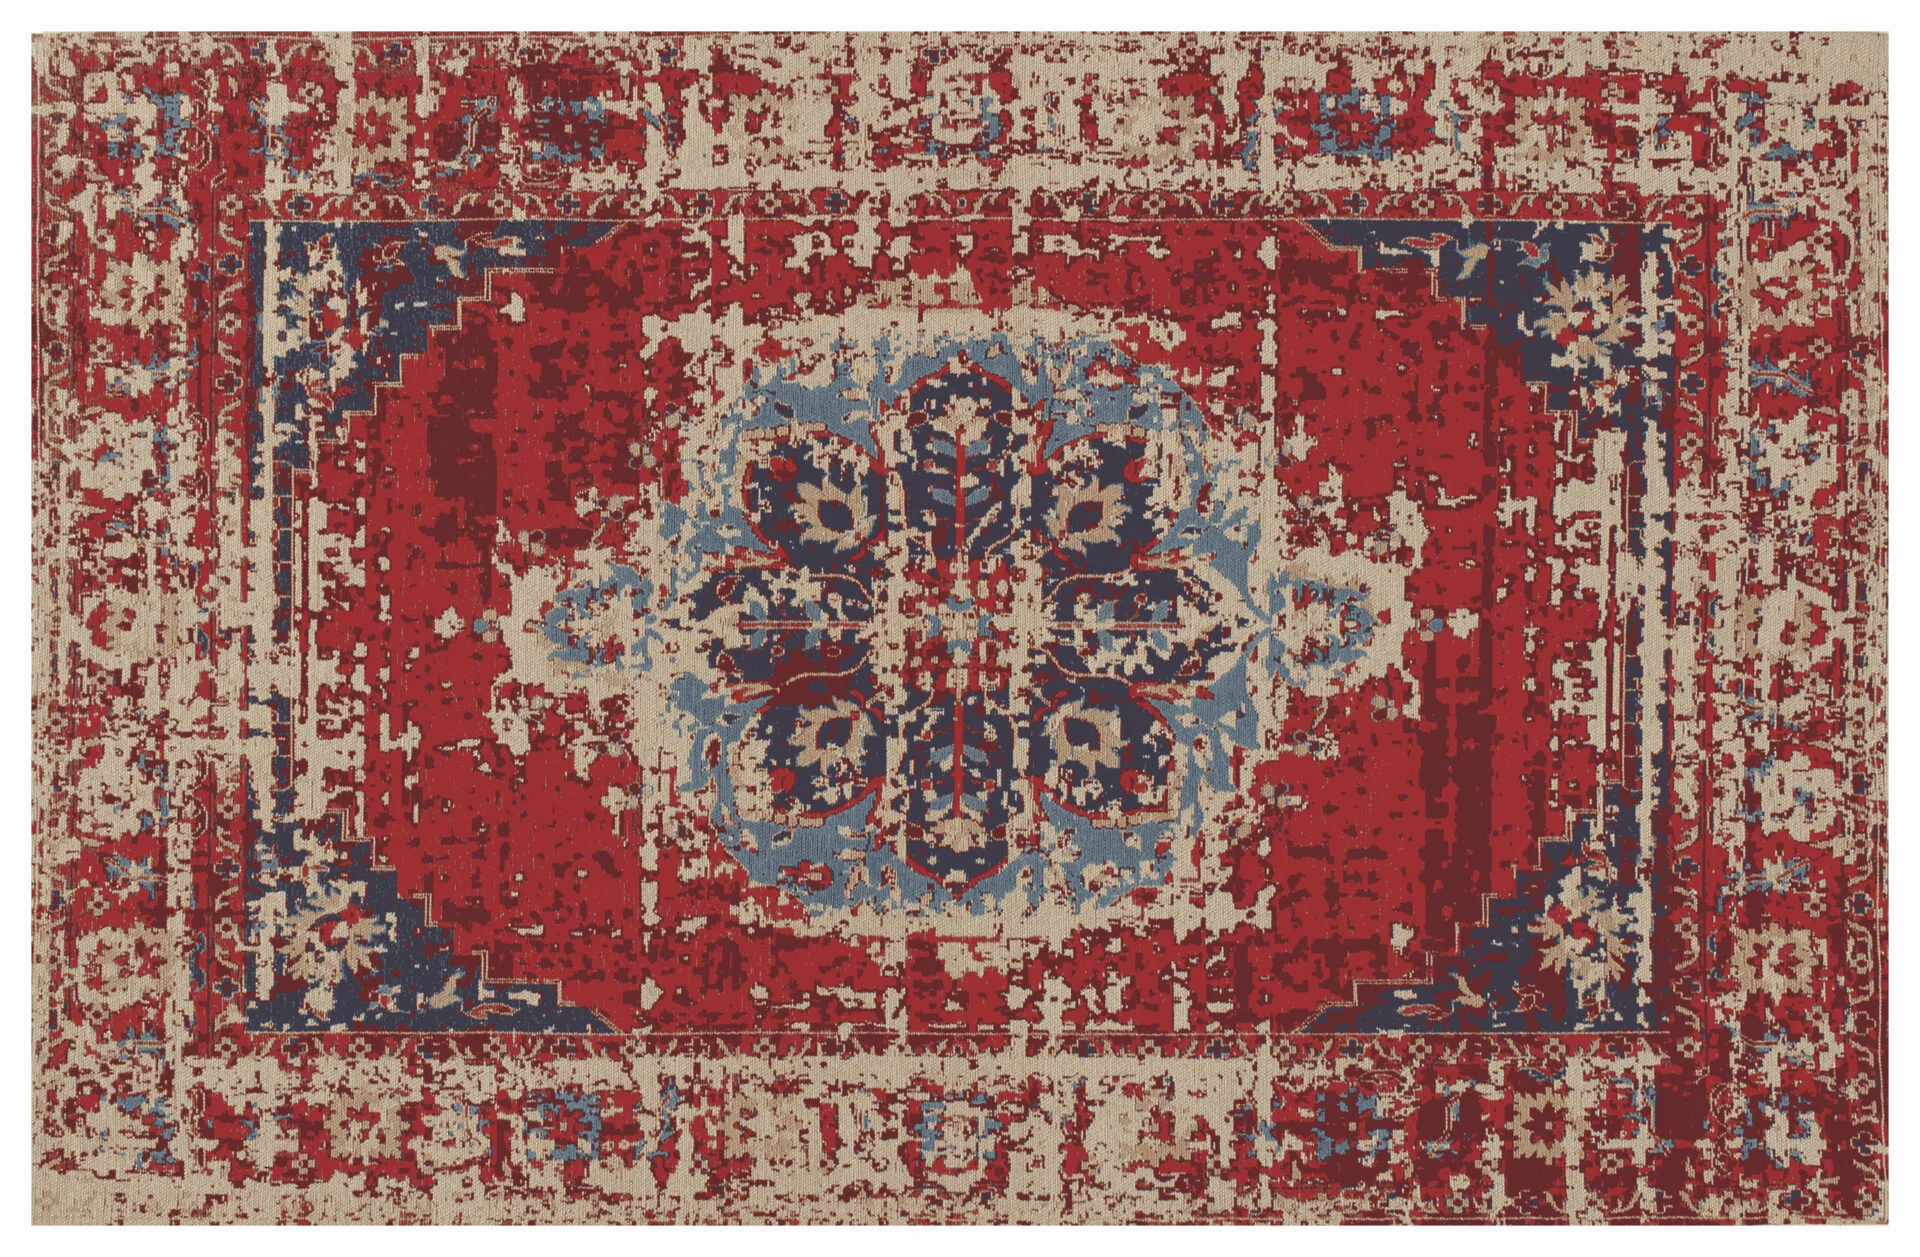 Persian rug laid on the floor